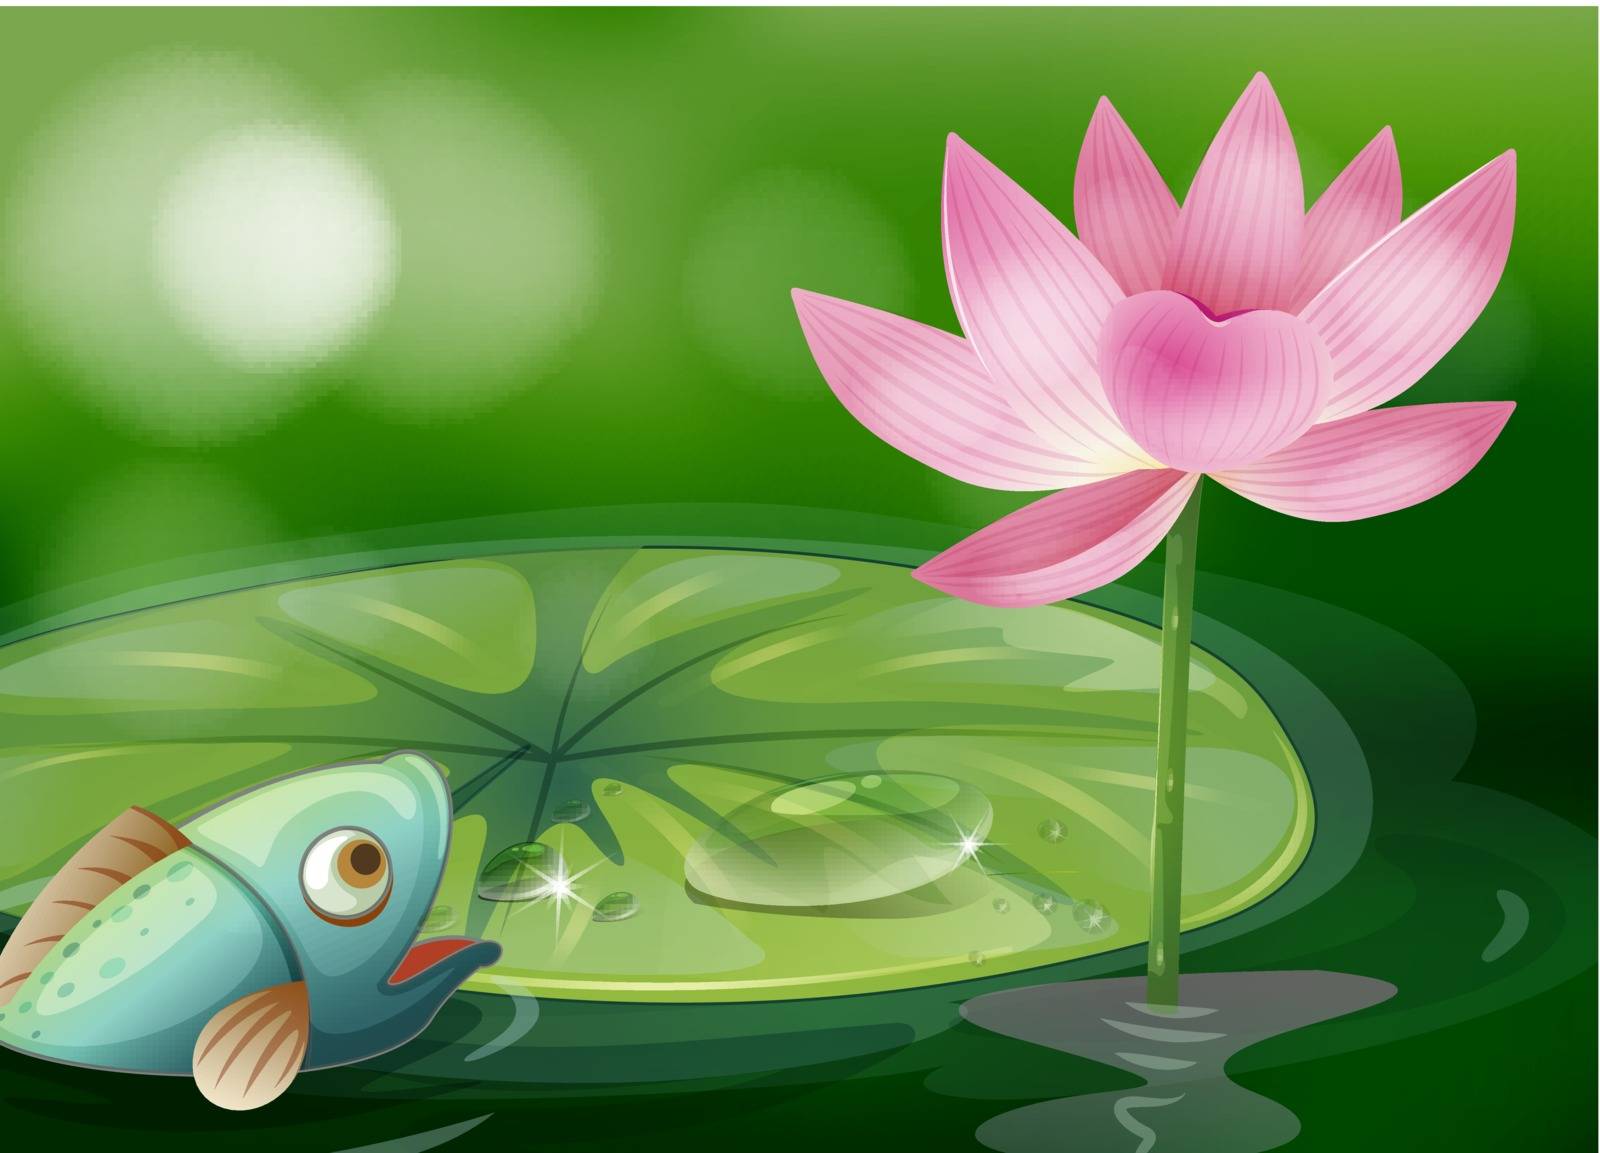 A fish with a waterlily and a flower at the pond by iimages